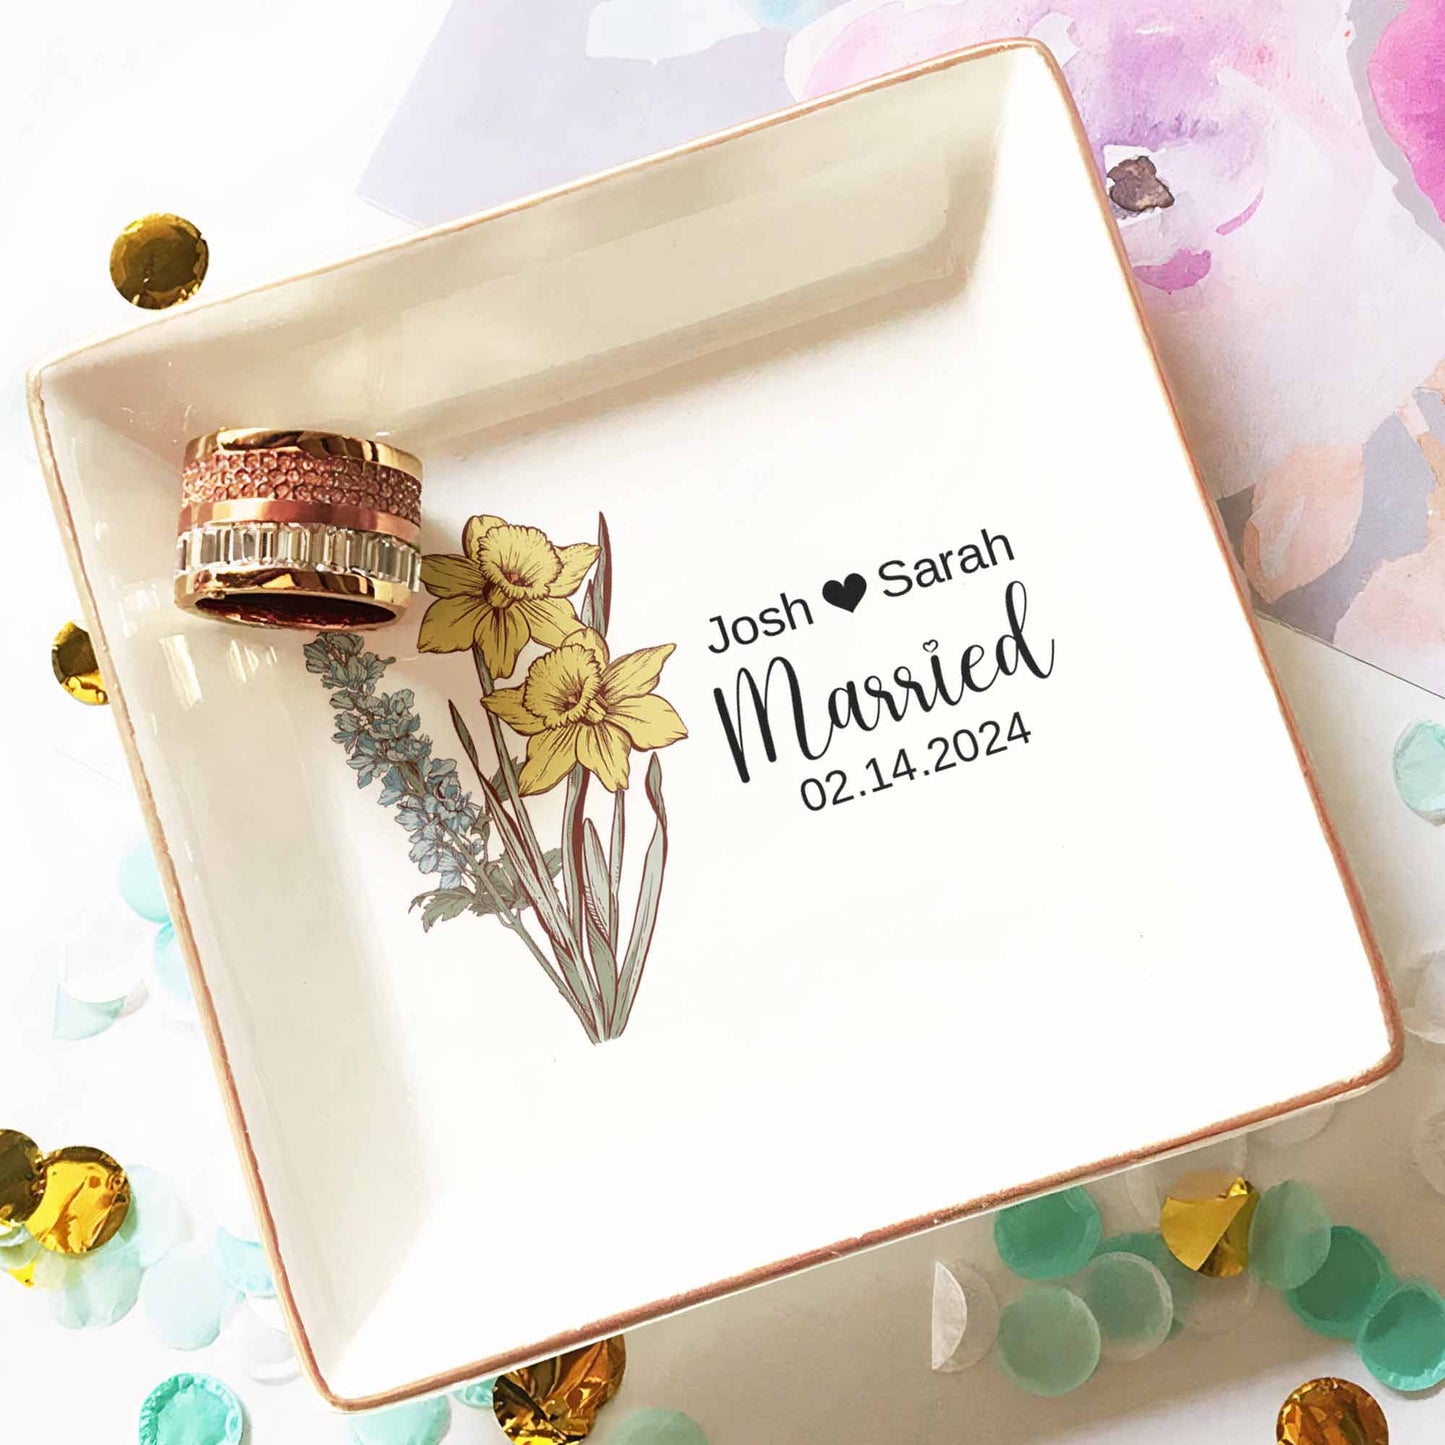 Married Since - Personalized Jewelry Dish